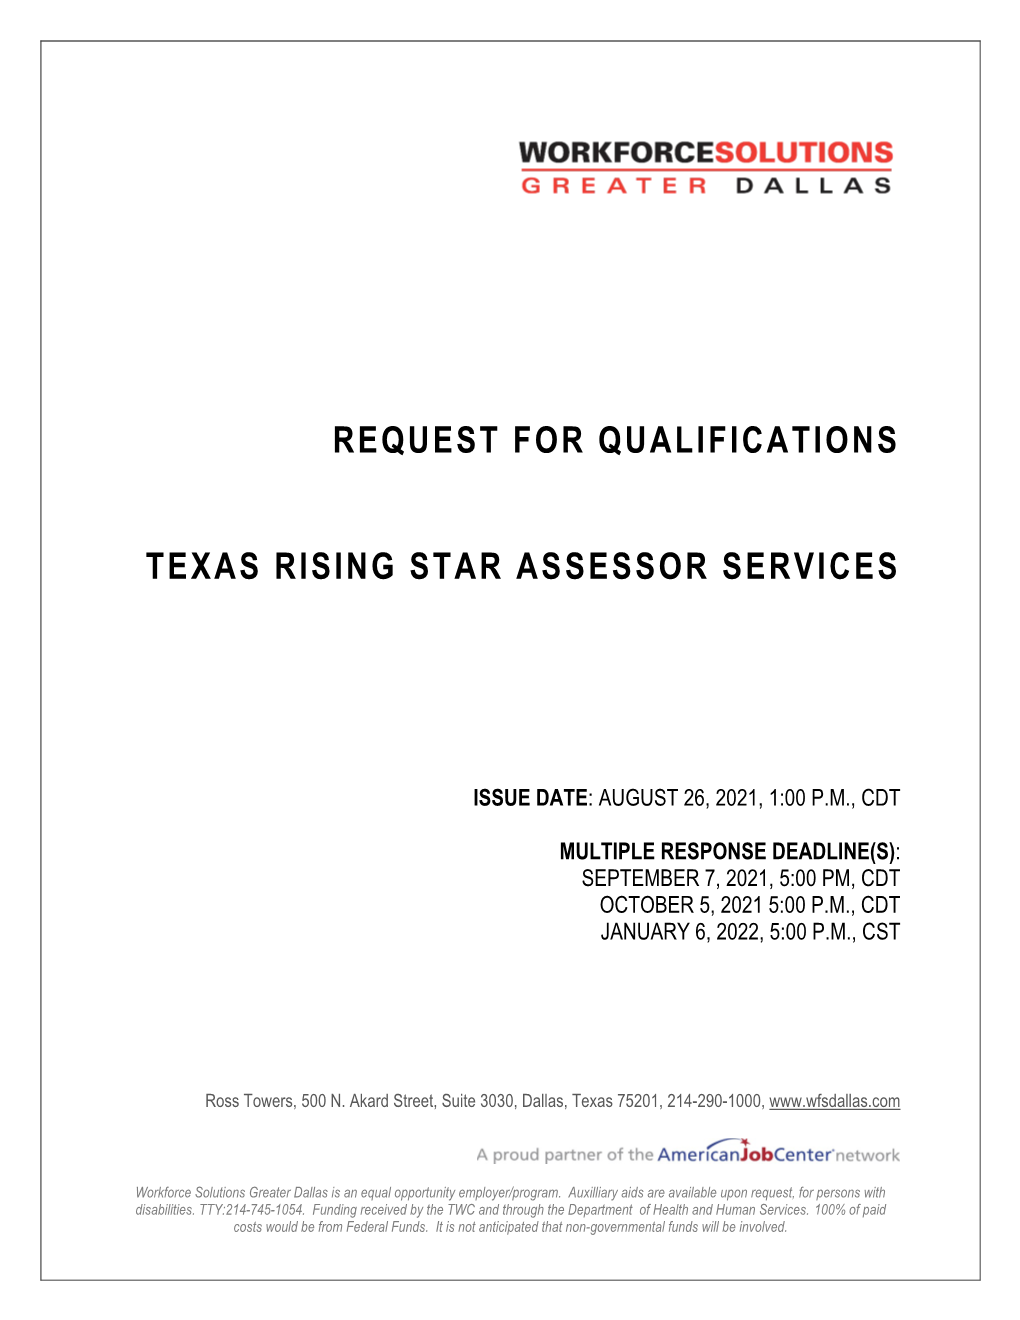 Request for Qualifications Texas Rising Star Assessor